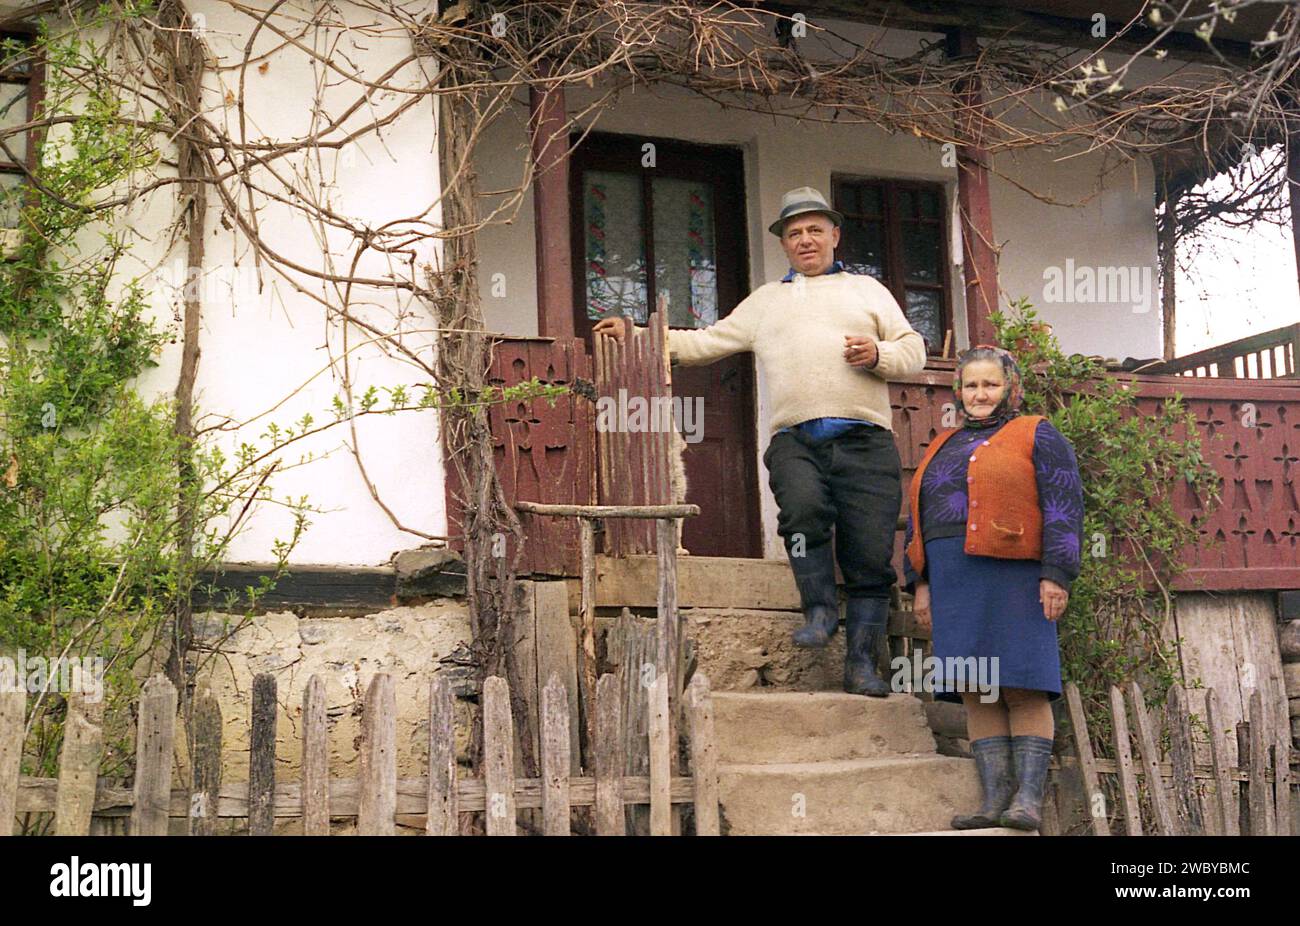 Arges County, Romania, approx. 1999. Elderly couple on the porch of their old, traditional house. Stock Photo